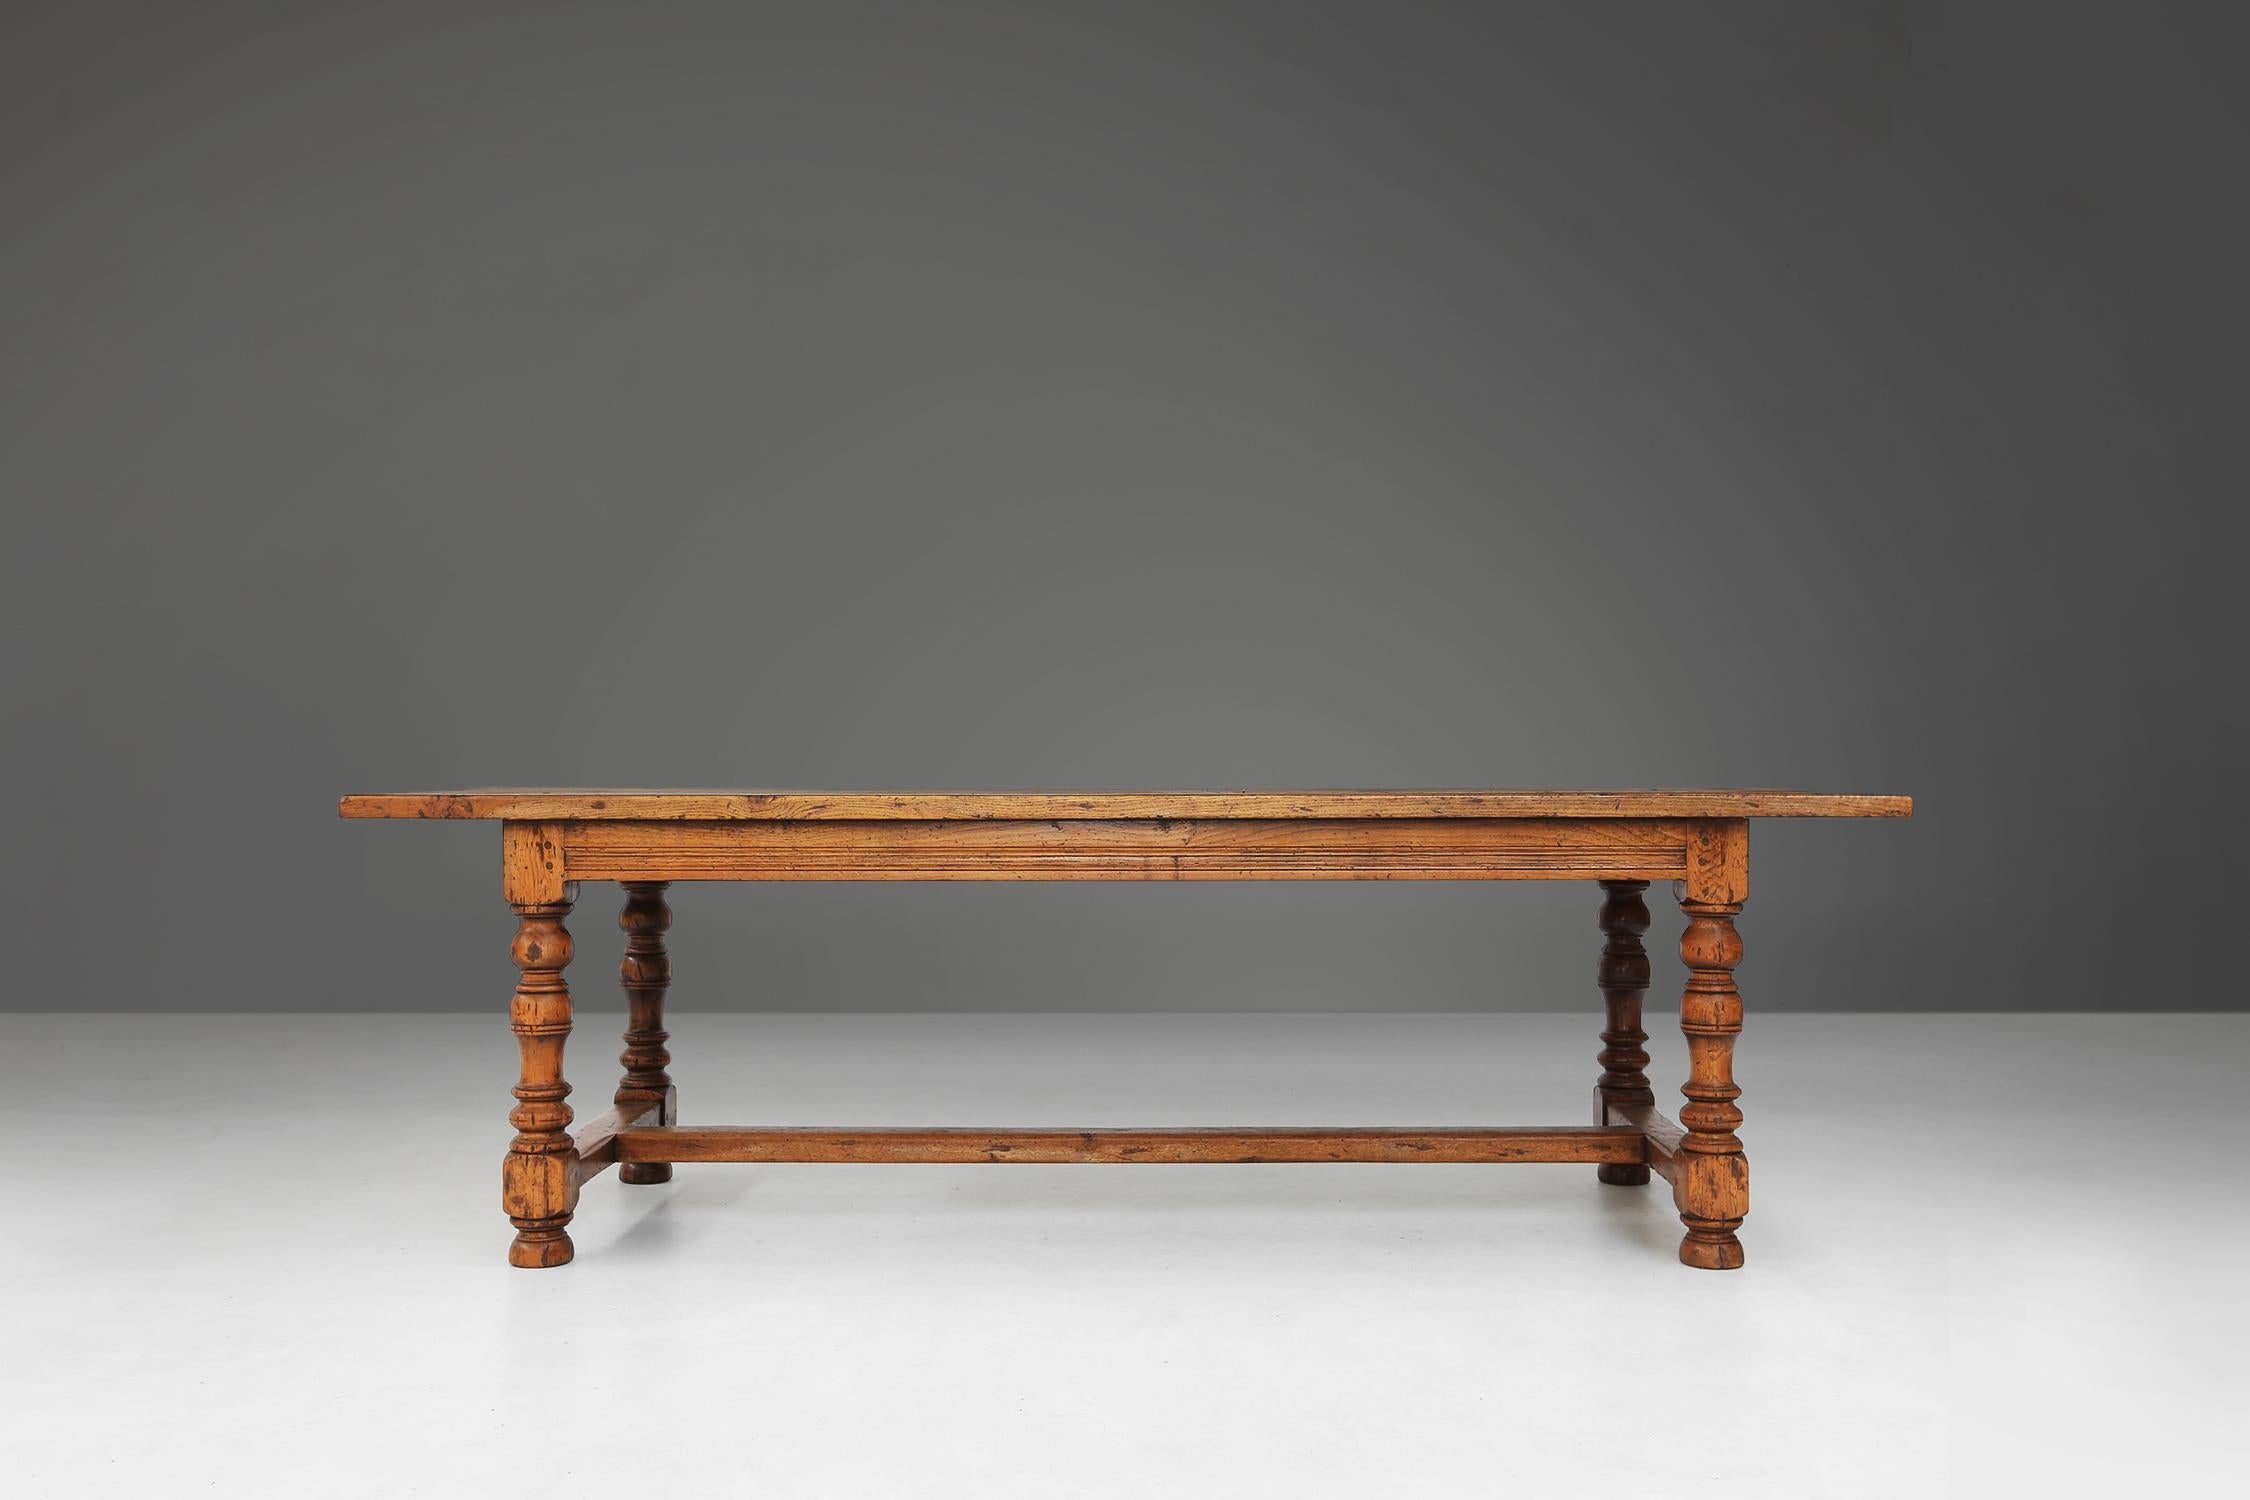 Made in the 18th century in full oak, this antique French table is a unique and quality piece of furniture. It has turned legs and a crossbar, which are connected with a tapered joint. This is a traditional and sturdy way of attaching wooden parts